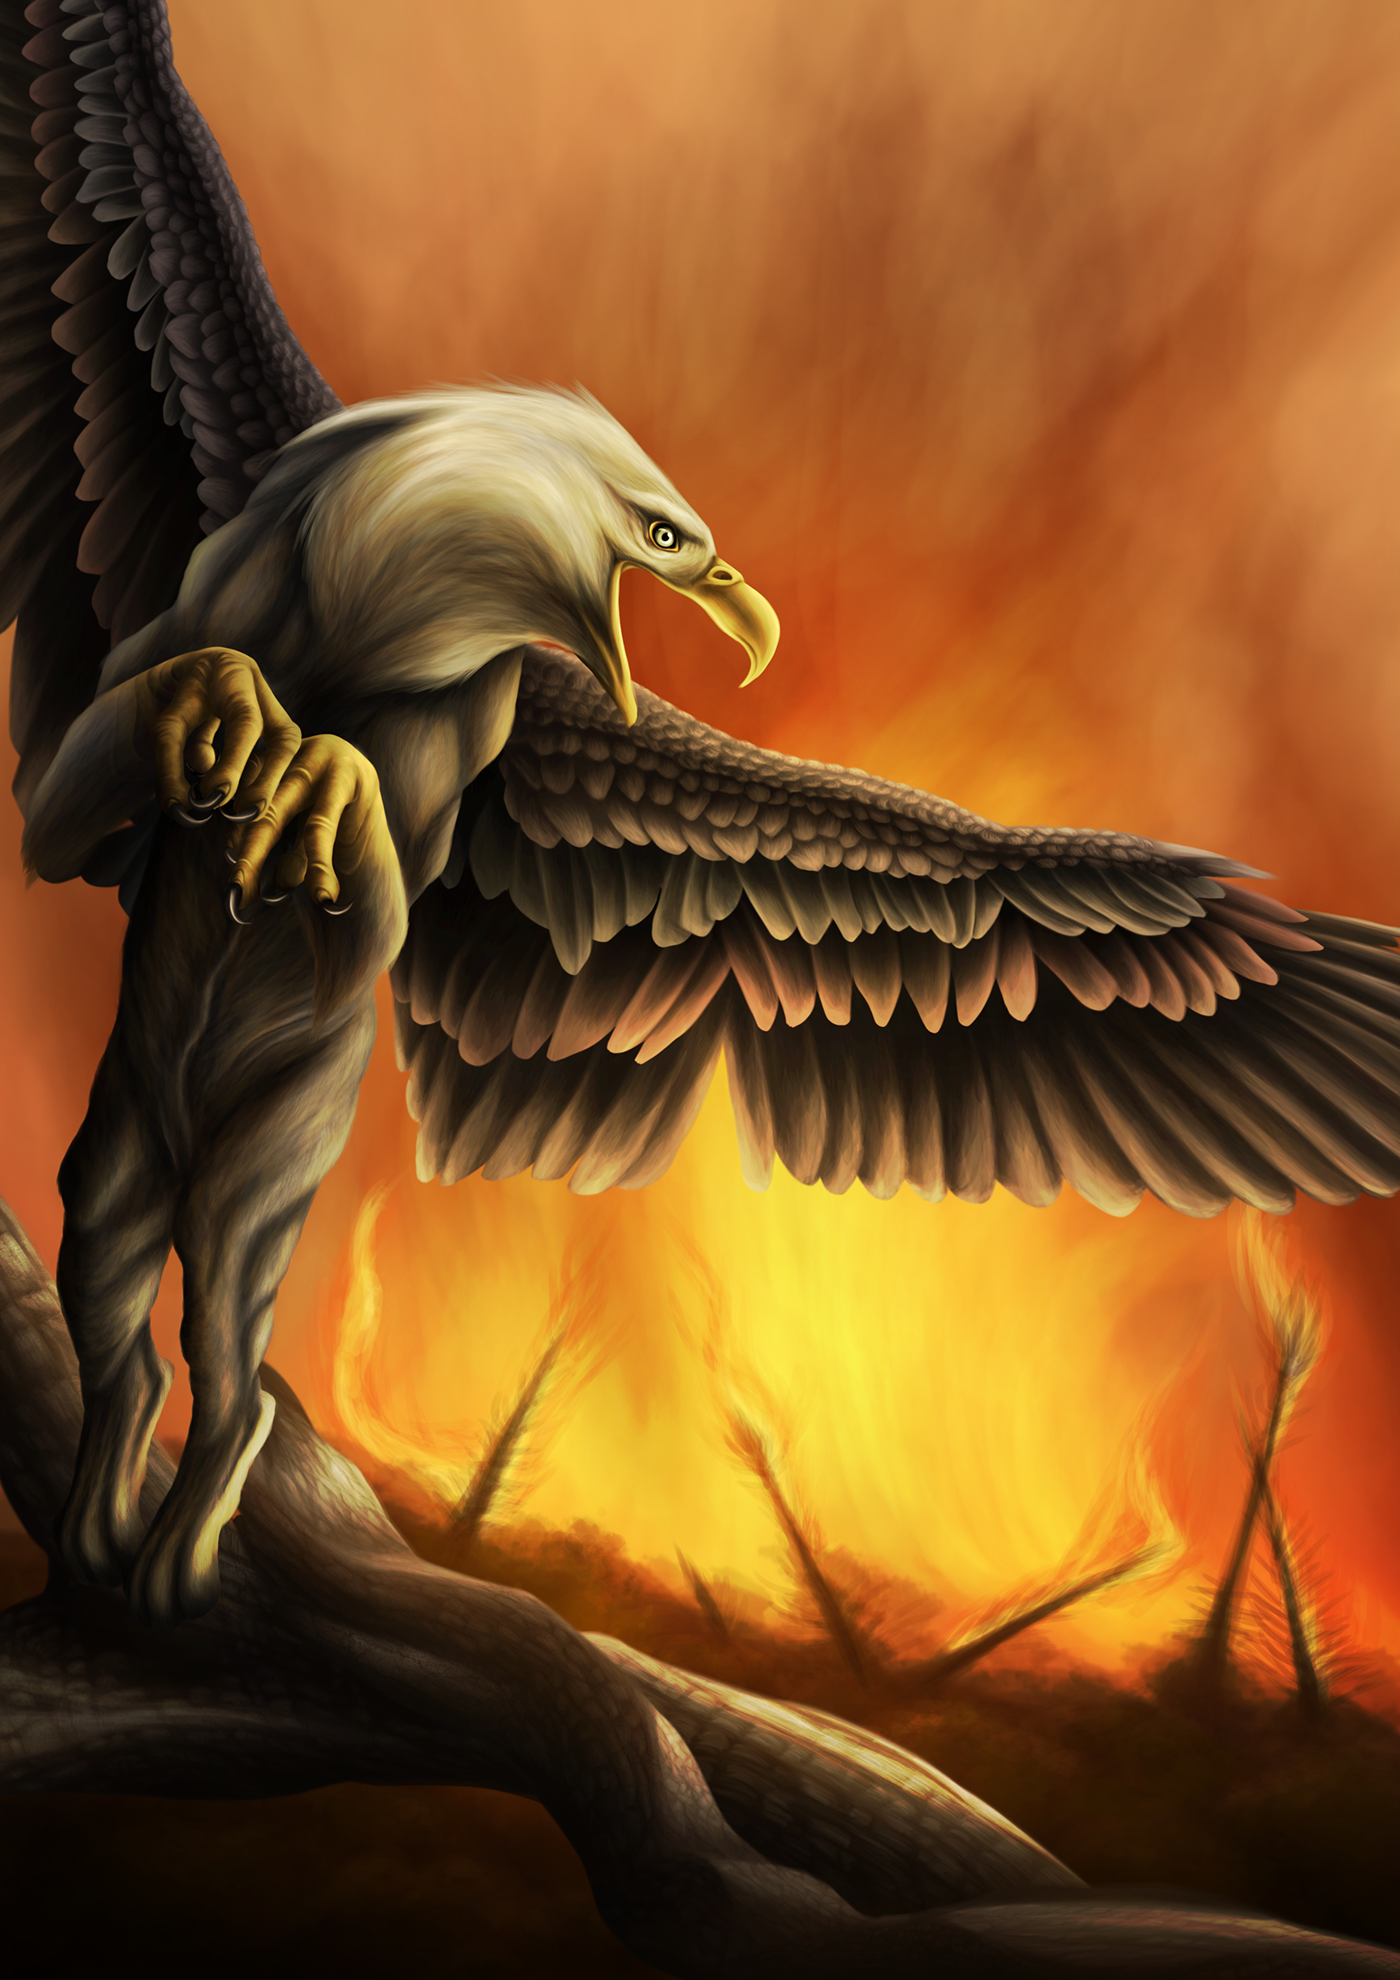 Griffin californian wildfires wildfire California fantasy vs realism